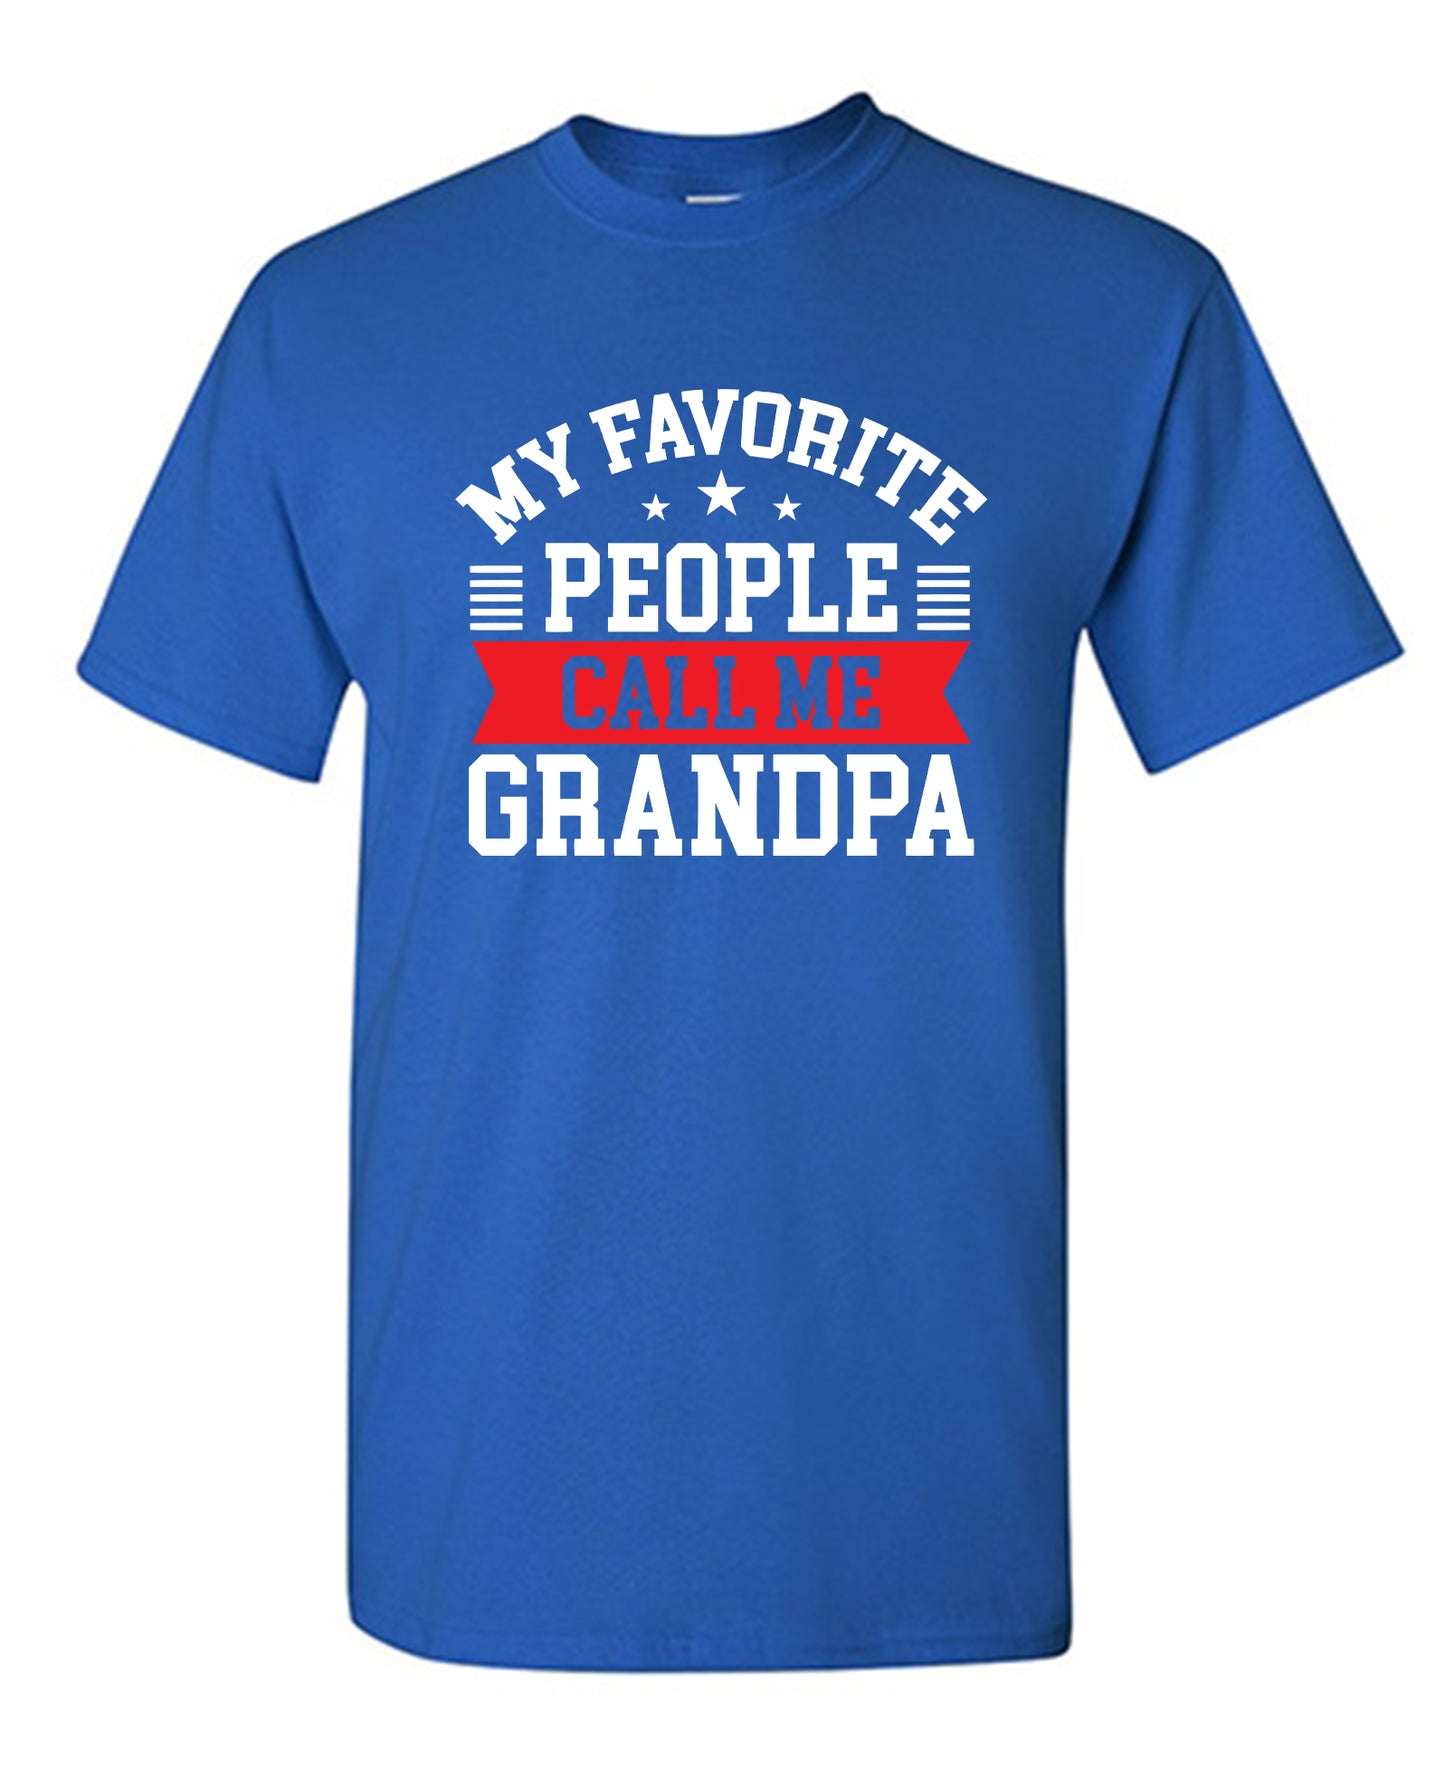 My Favorite People Call Me Grandpa, New - Funny T Shirts & Graphic Tees